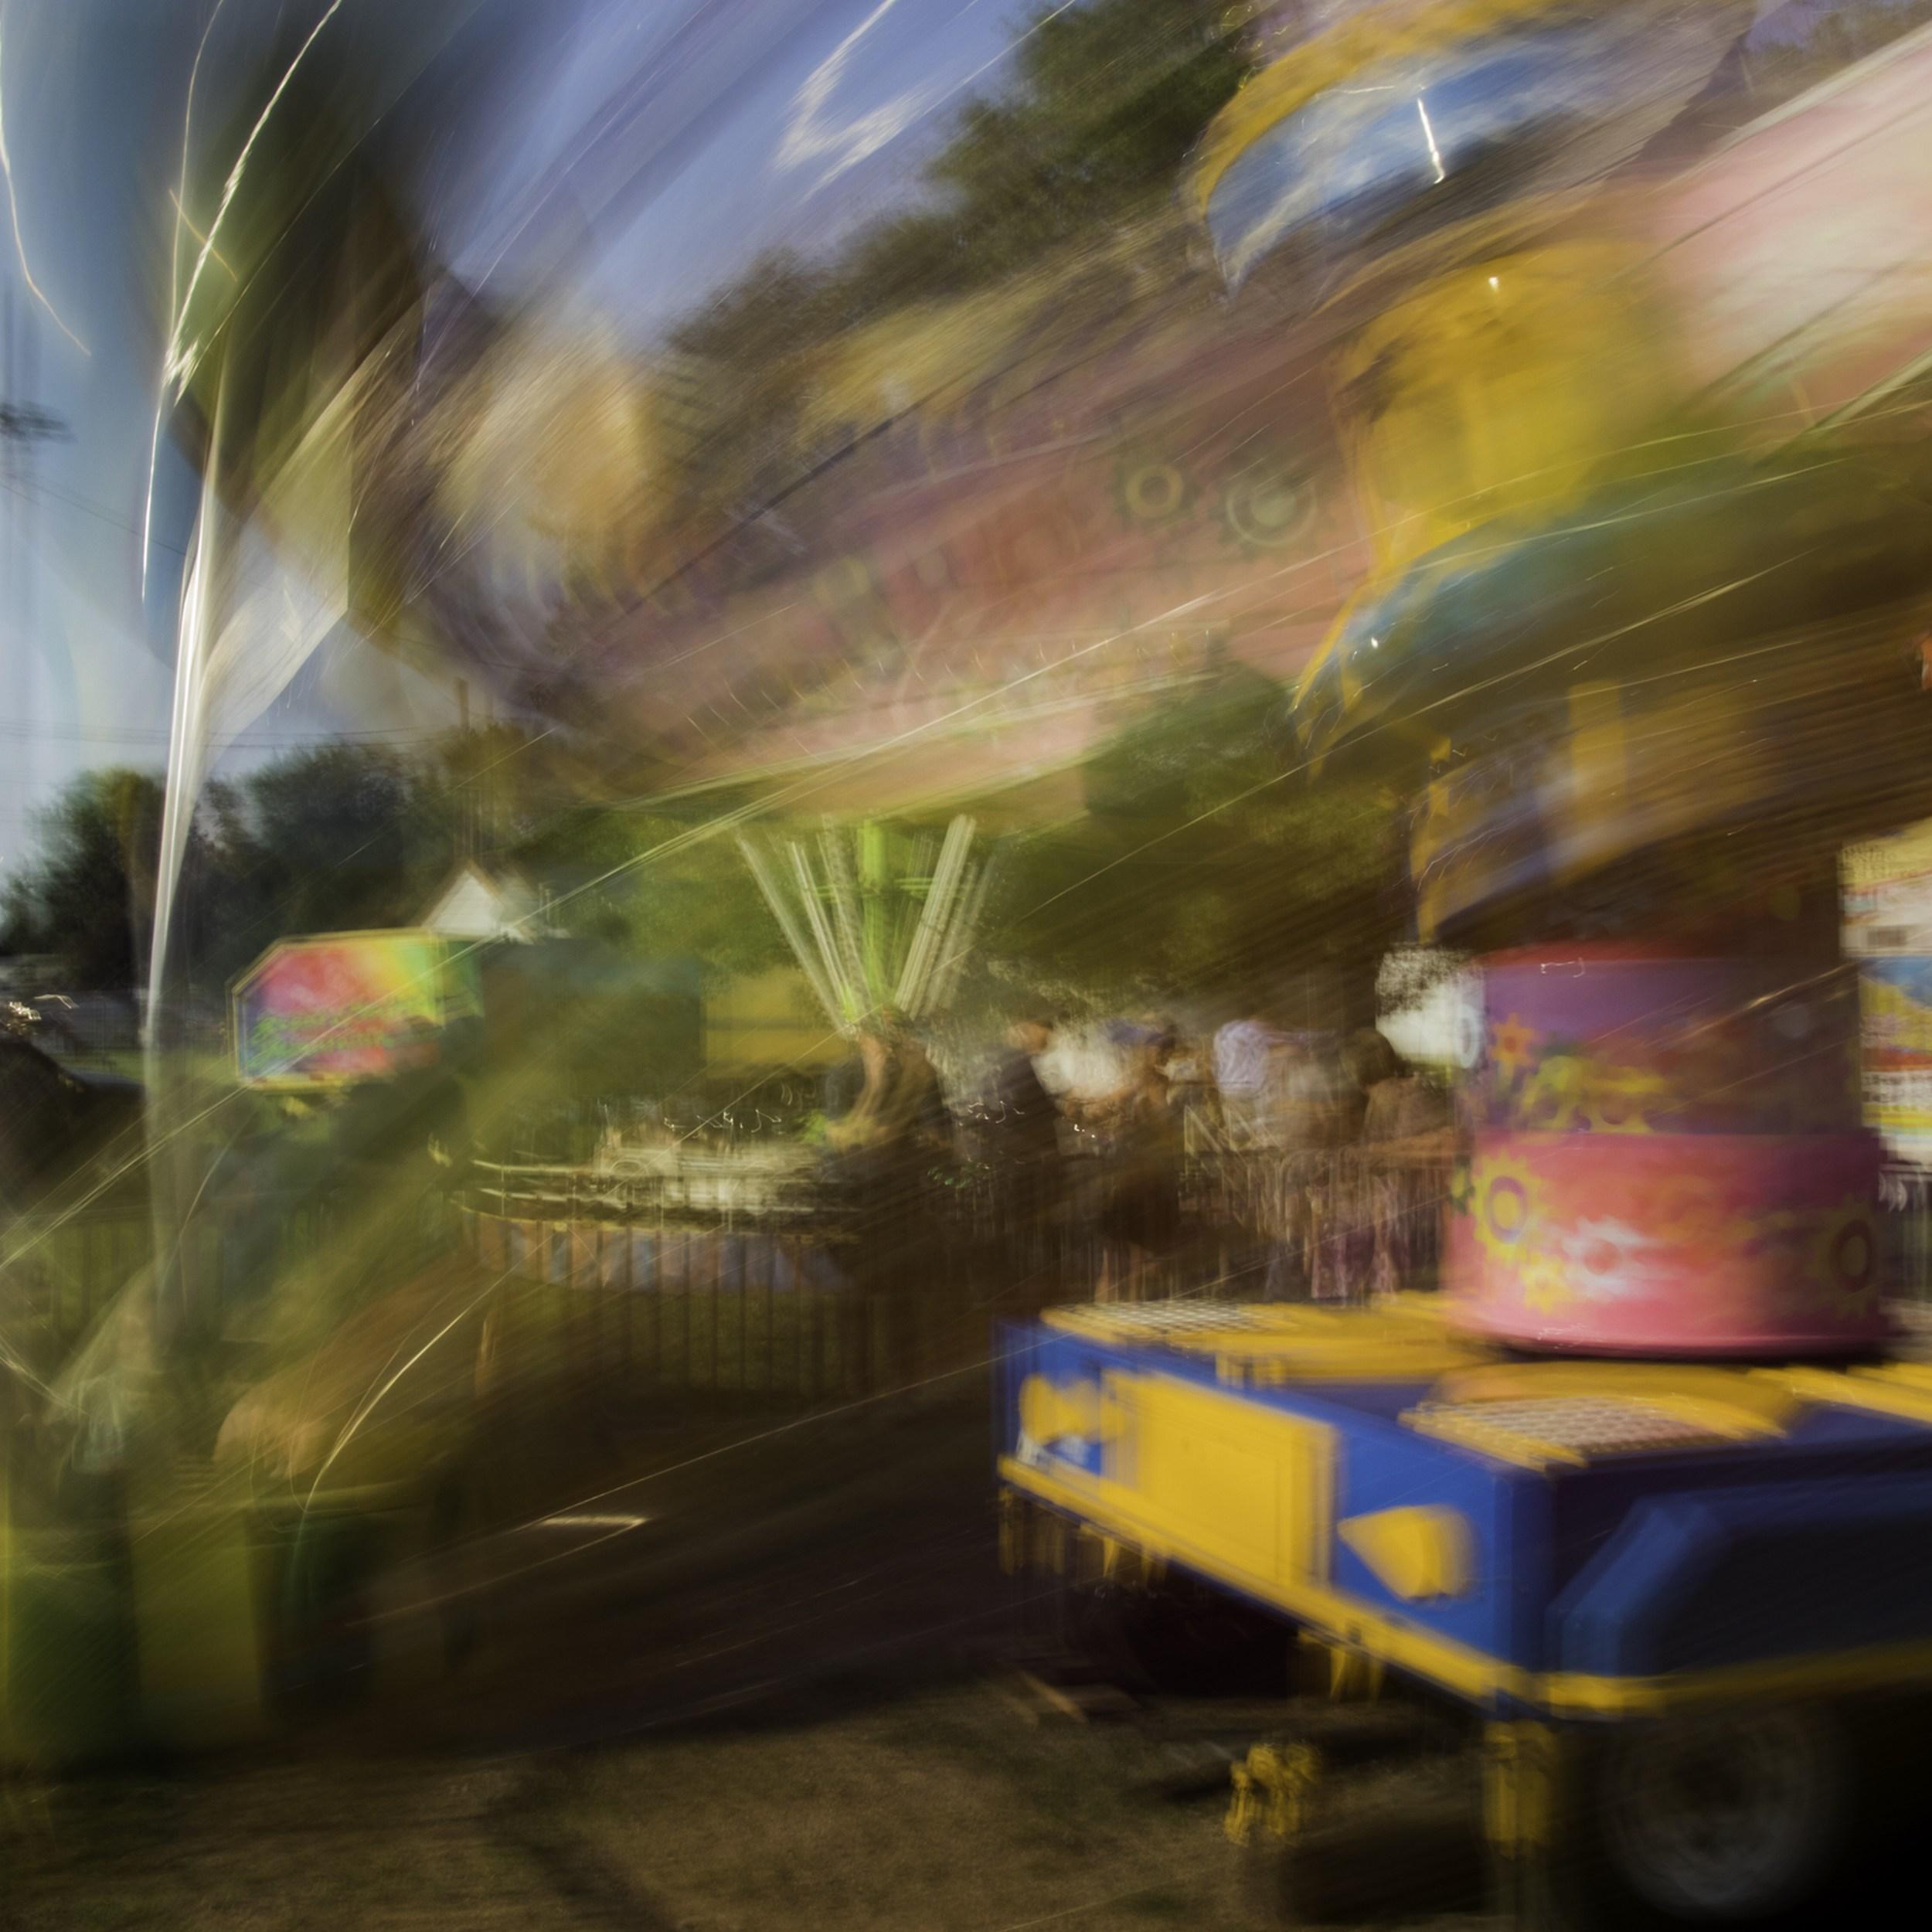 Jeffrey Tamblyn Abstract Photograph - Twirl (carnival ride, motion blur, colorful, Midwest US, vibrant)